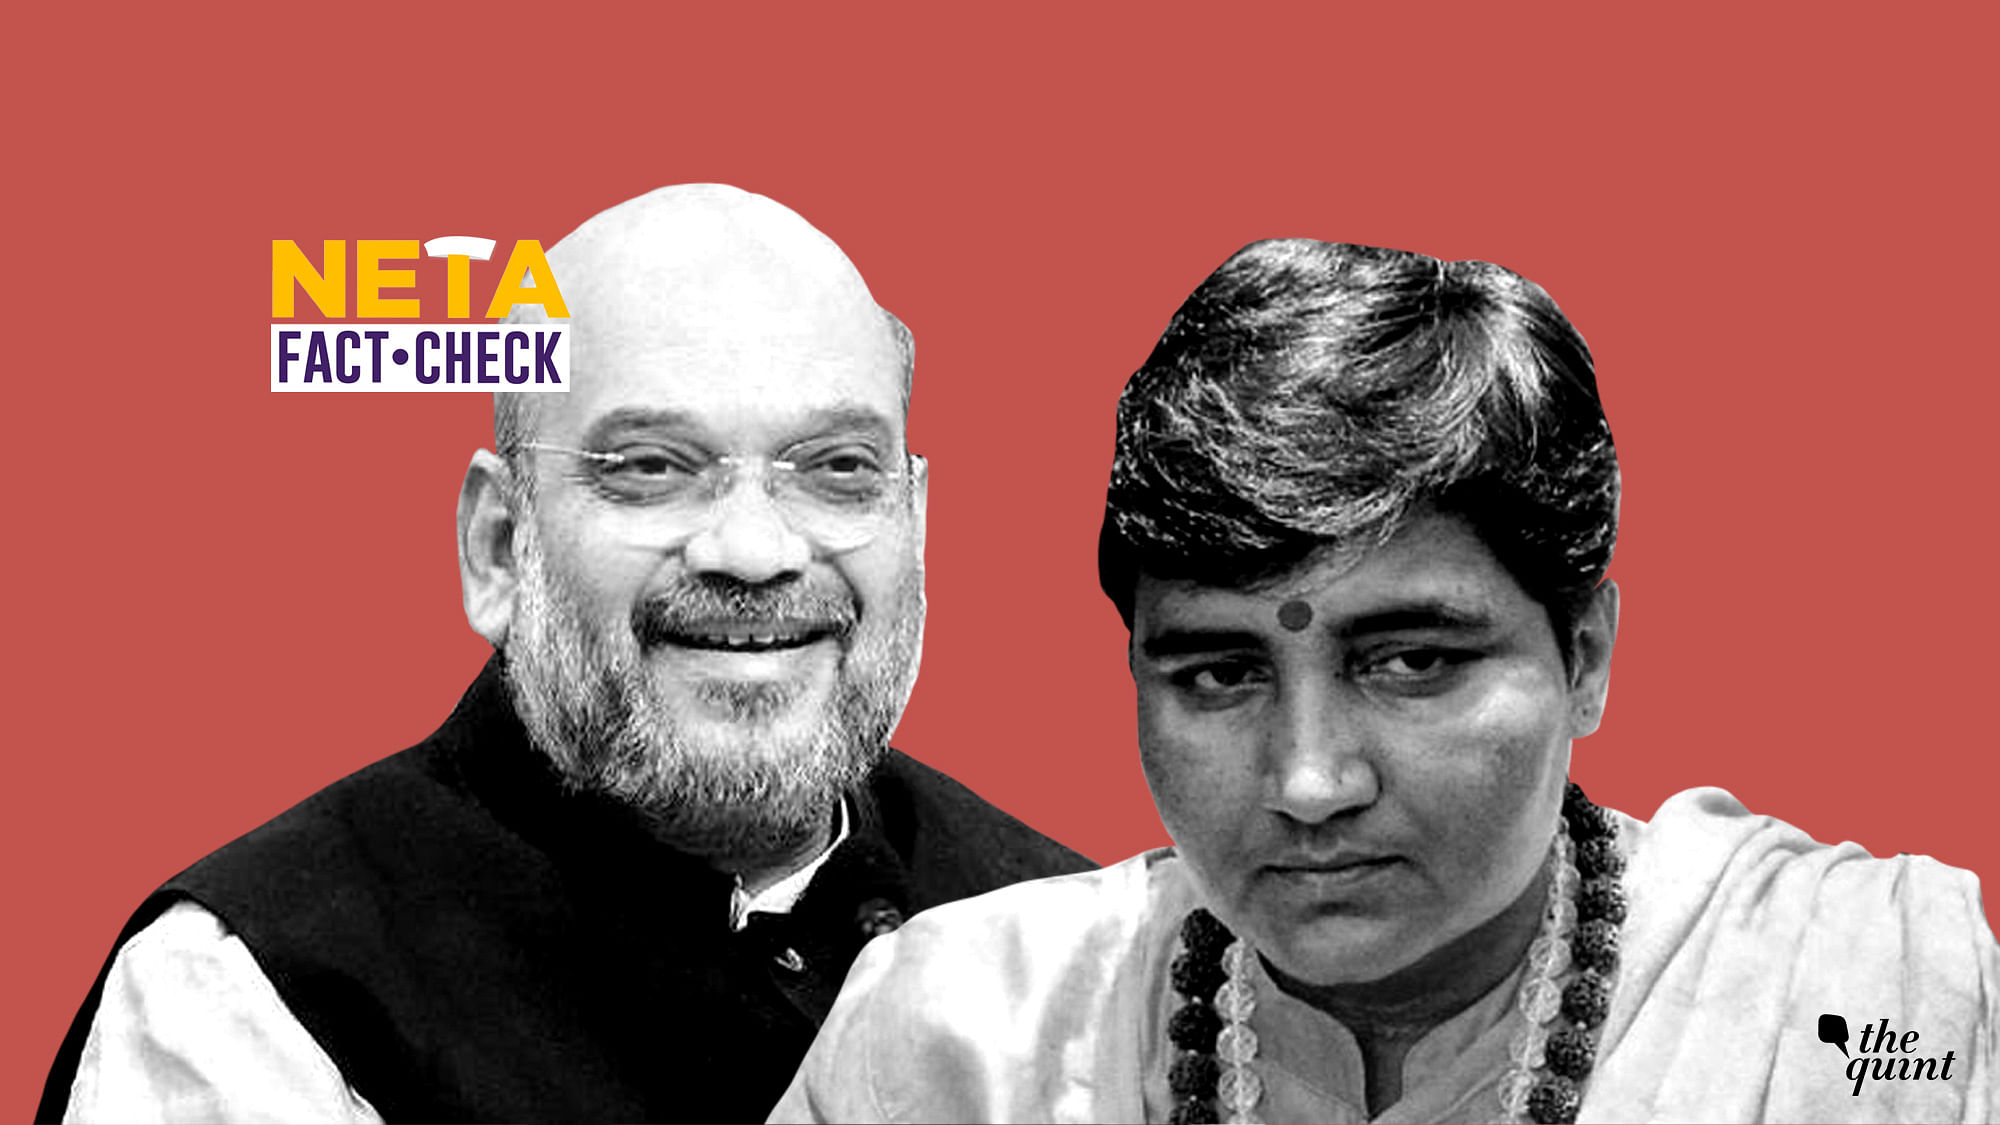 In a press conference, Amit Shah again refuted claims made against Pragya Thakur’s candidature.